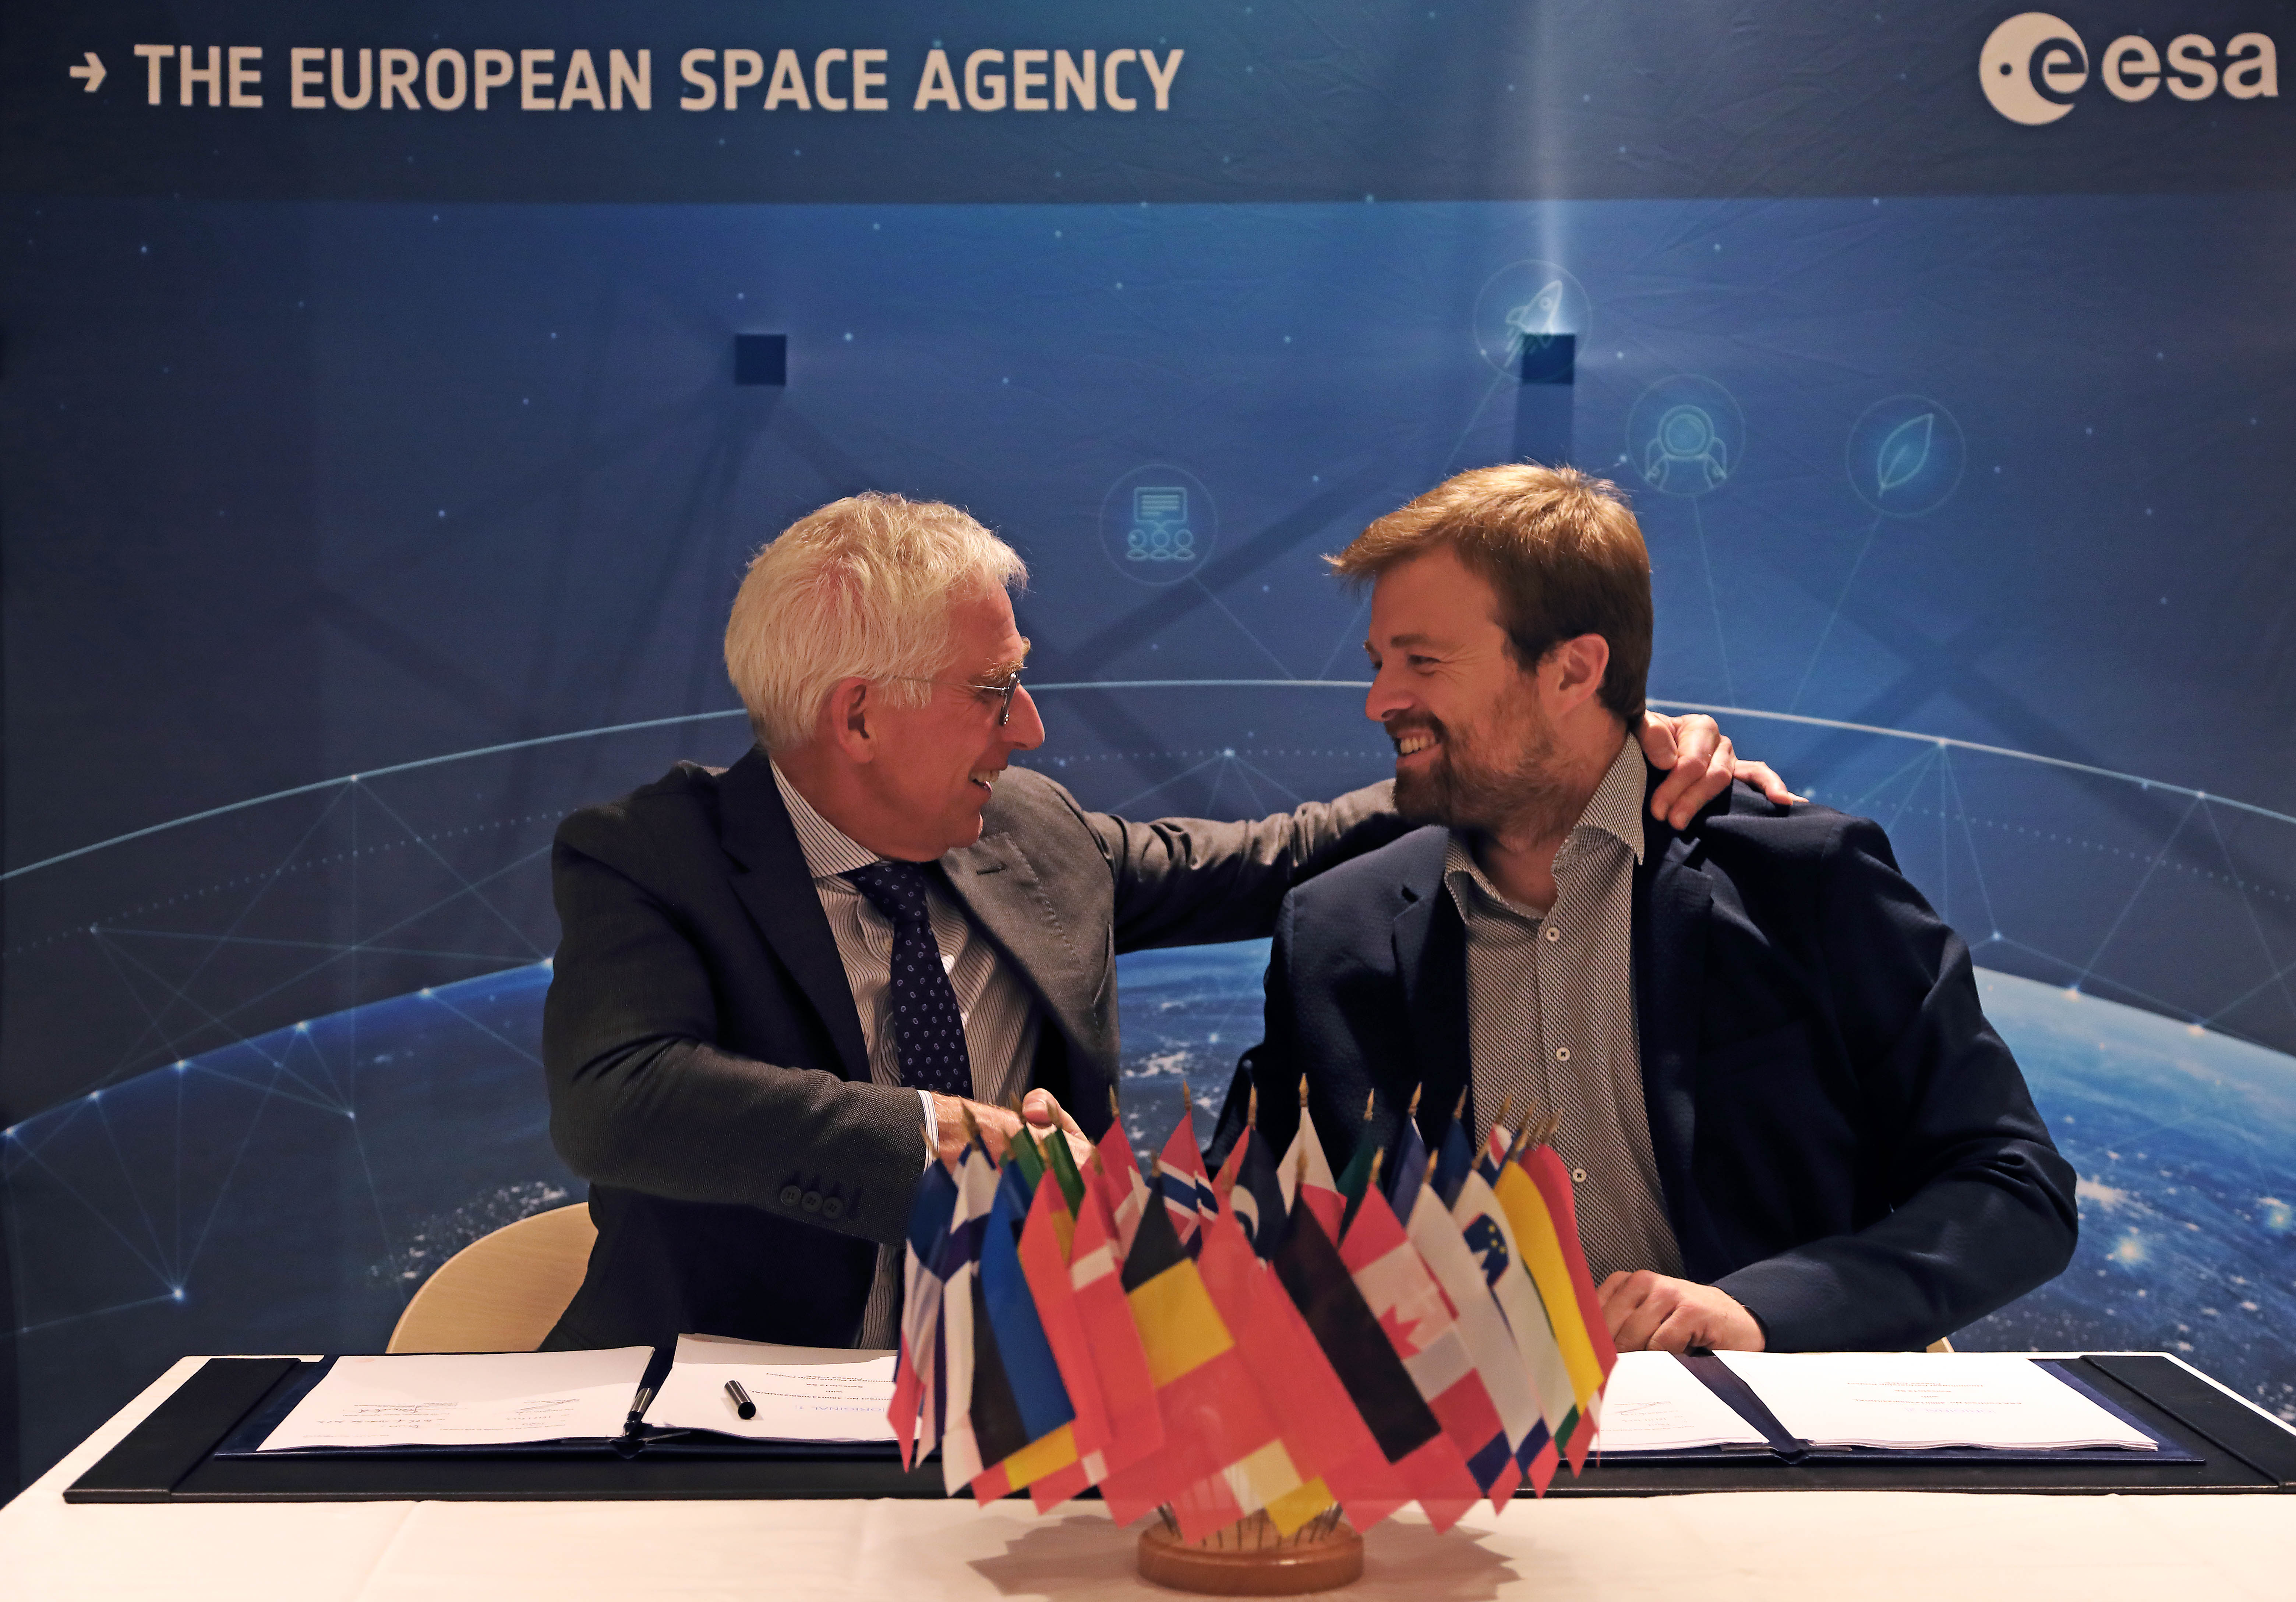 Javier Benedicto, Acting Director of ESA’s Connectivity and Secure Communications, and Emile de Rijk, CEO and founder of Swissto12, complete the signature at ESA Headquarters in Paris.""